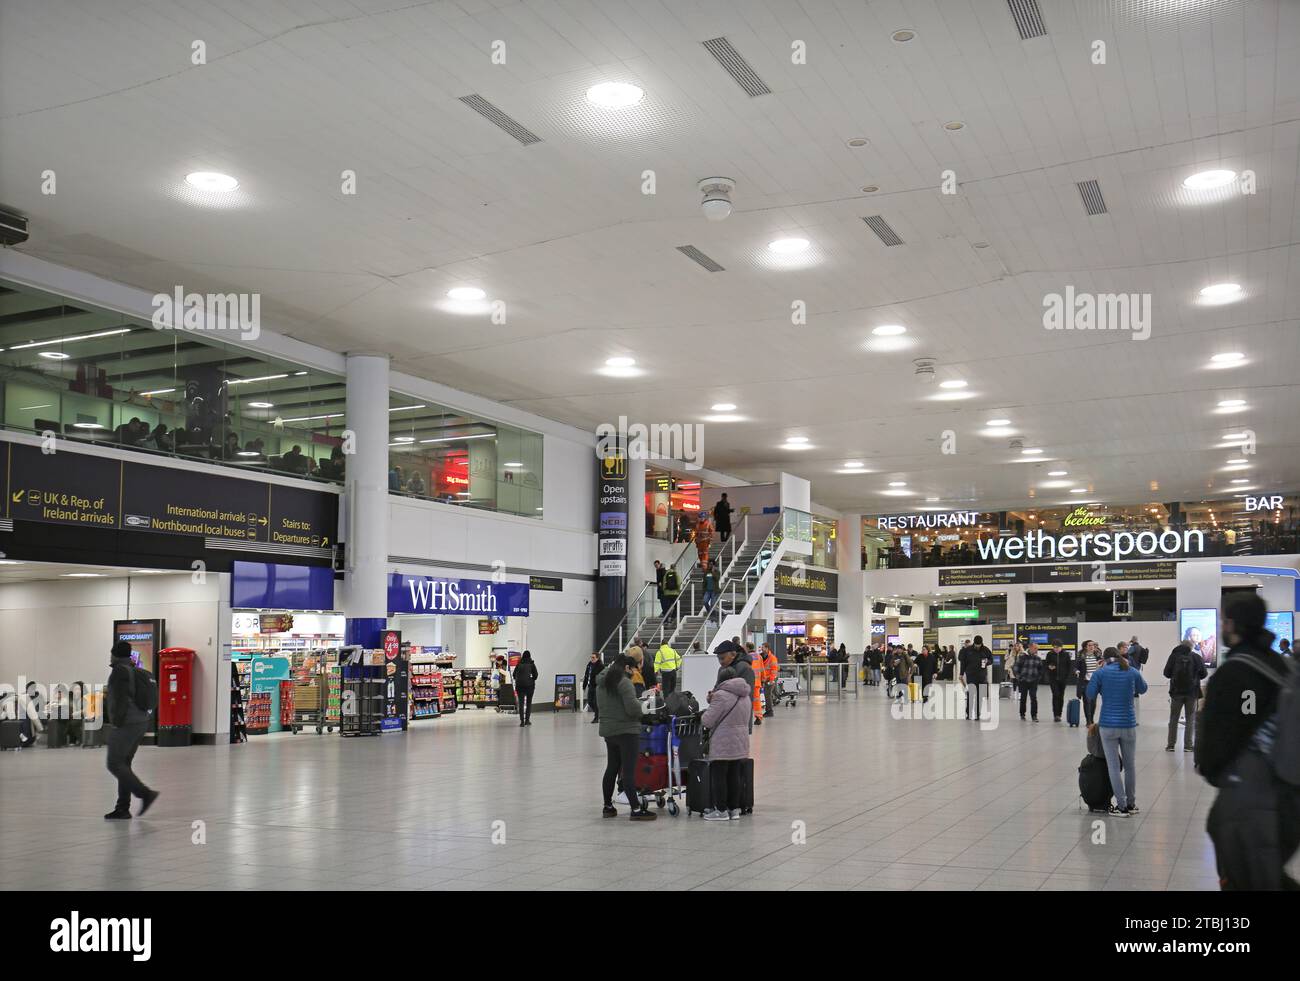 Gatwick Airport, South Terminal, check-in area. Shows passengers, departure boards, shops and restaurants. Stock Photo